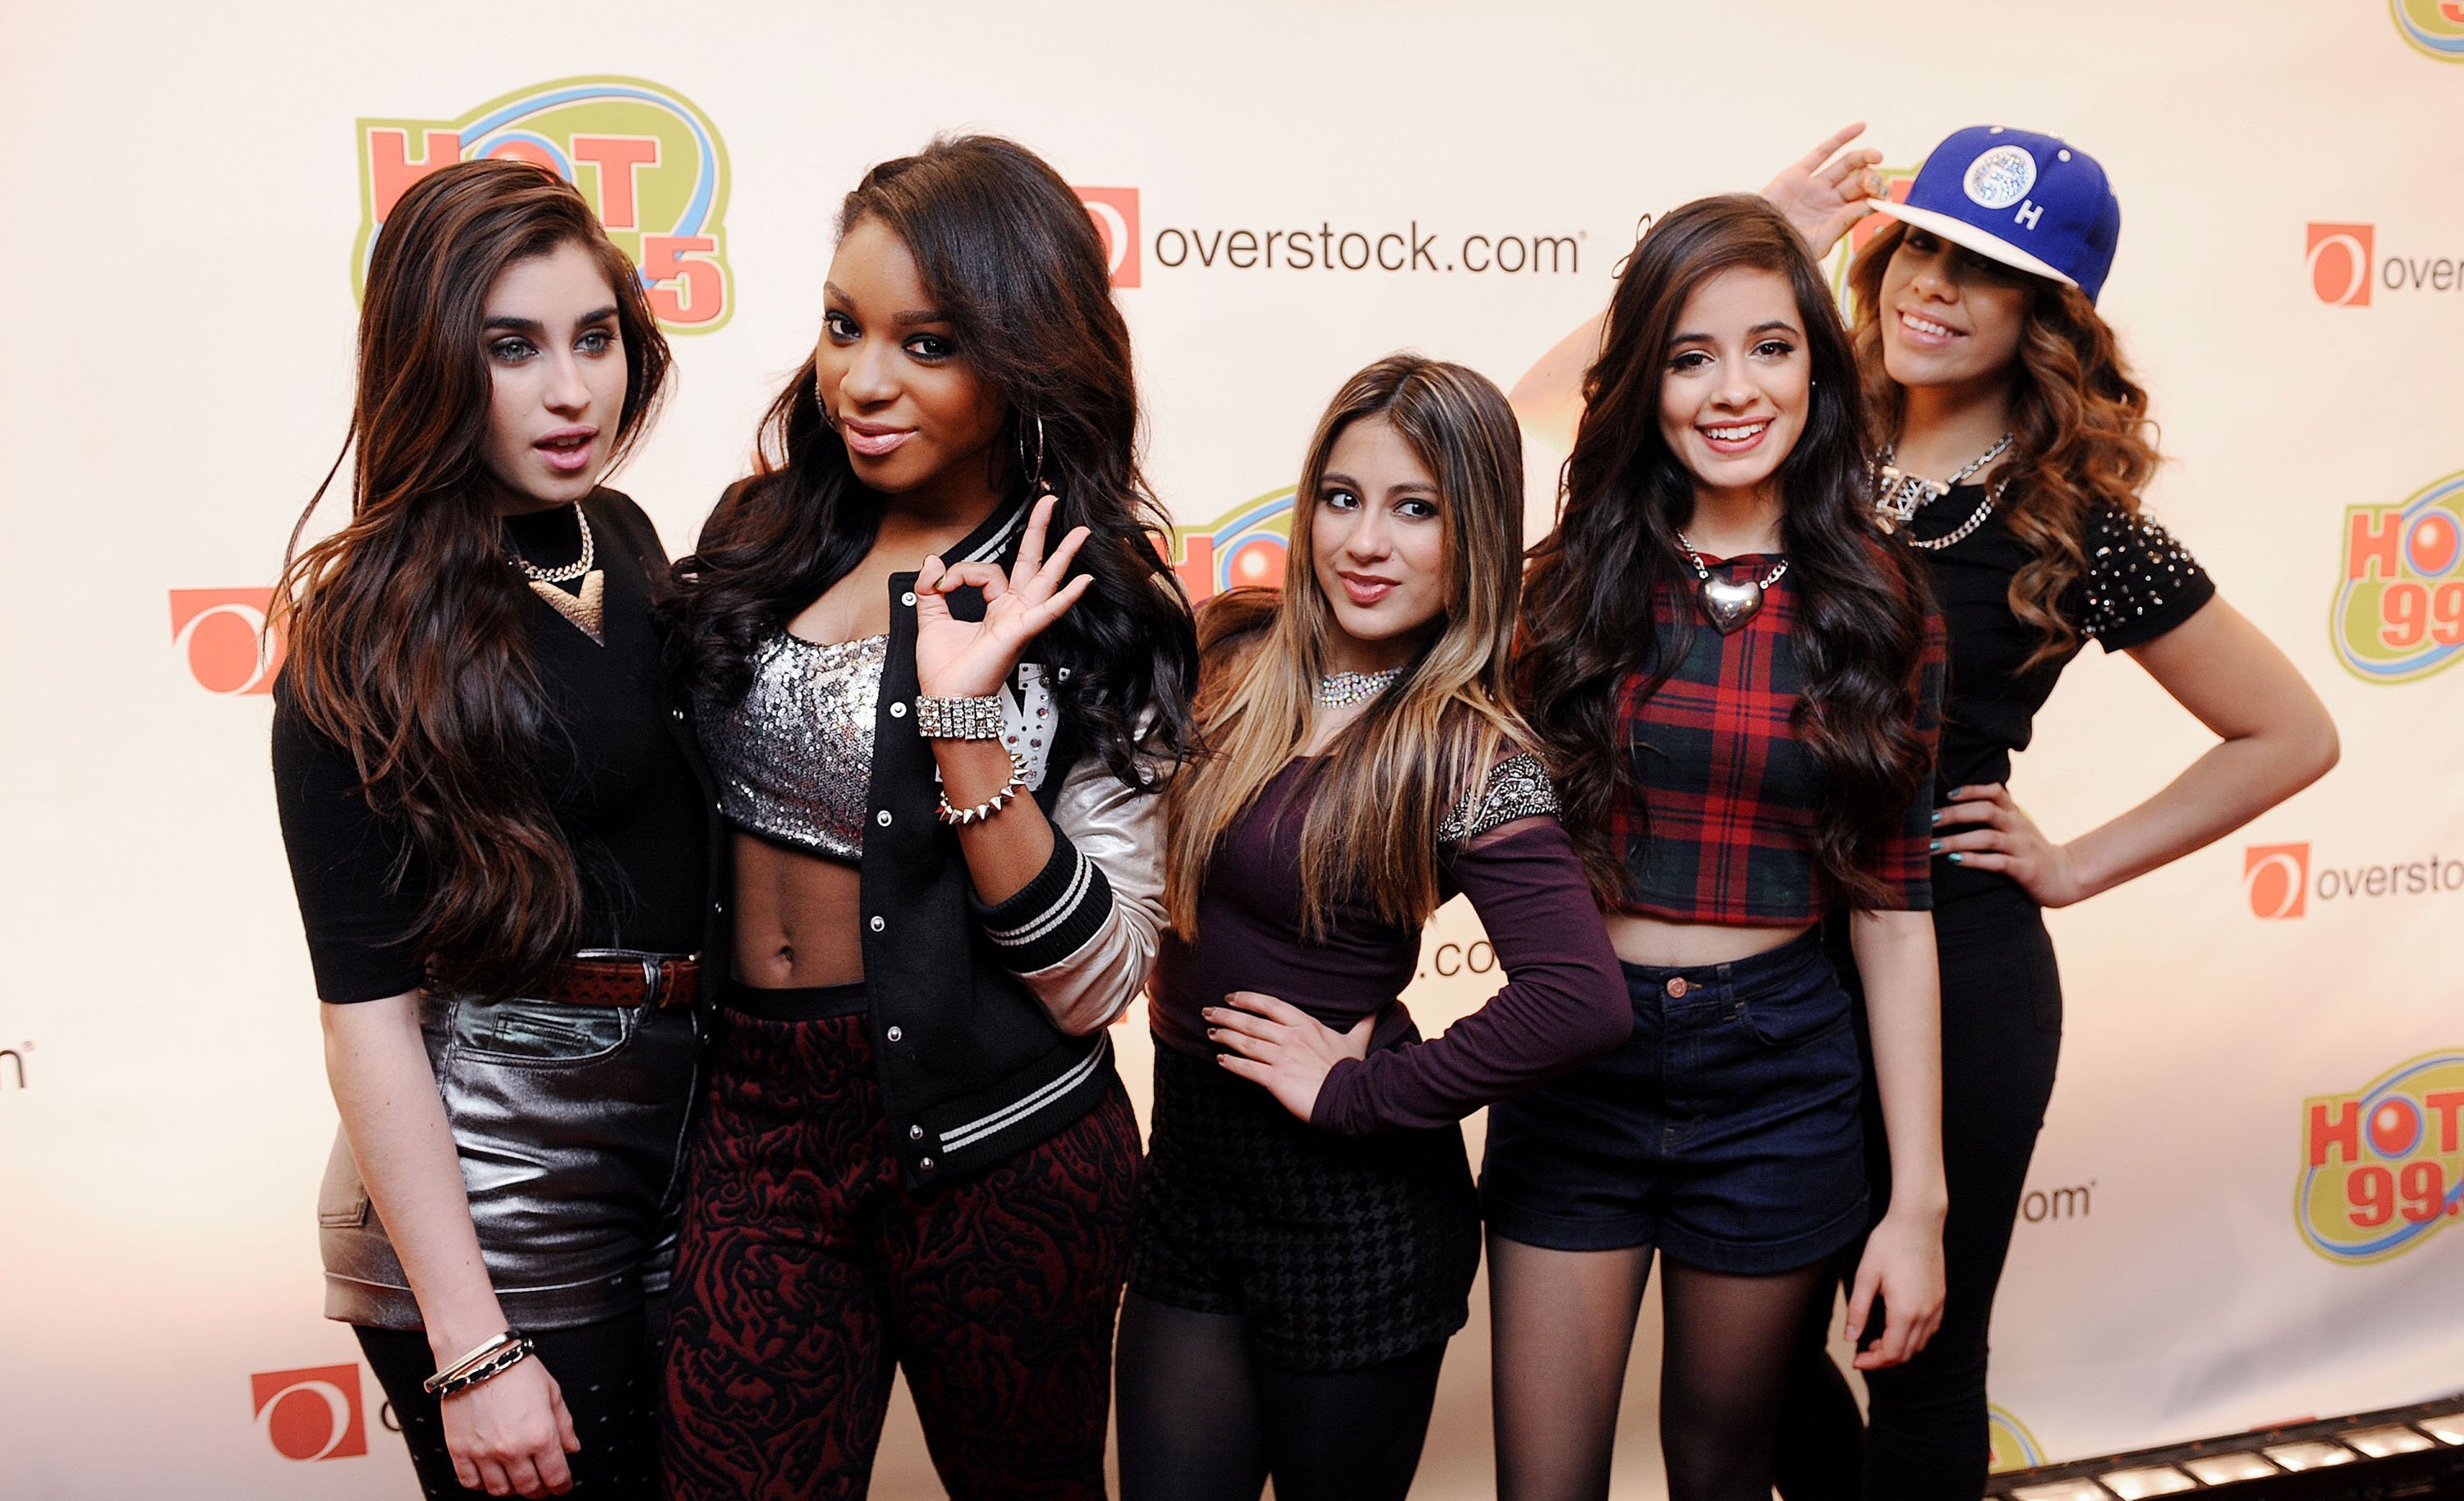 fifth harmony wallpaper hd,social group,fashion,event,photography,fashion accessory